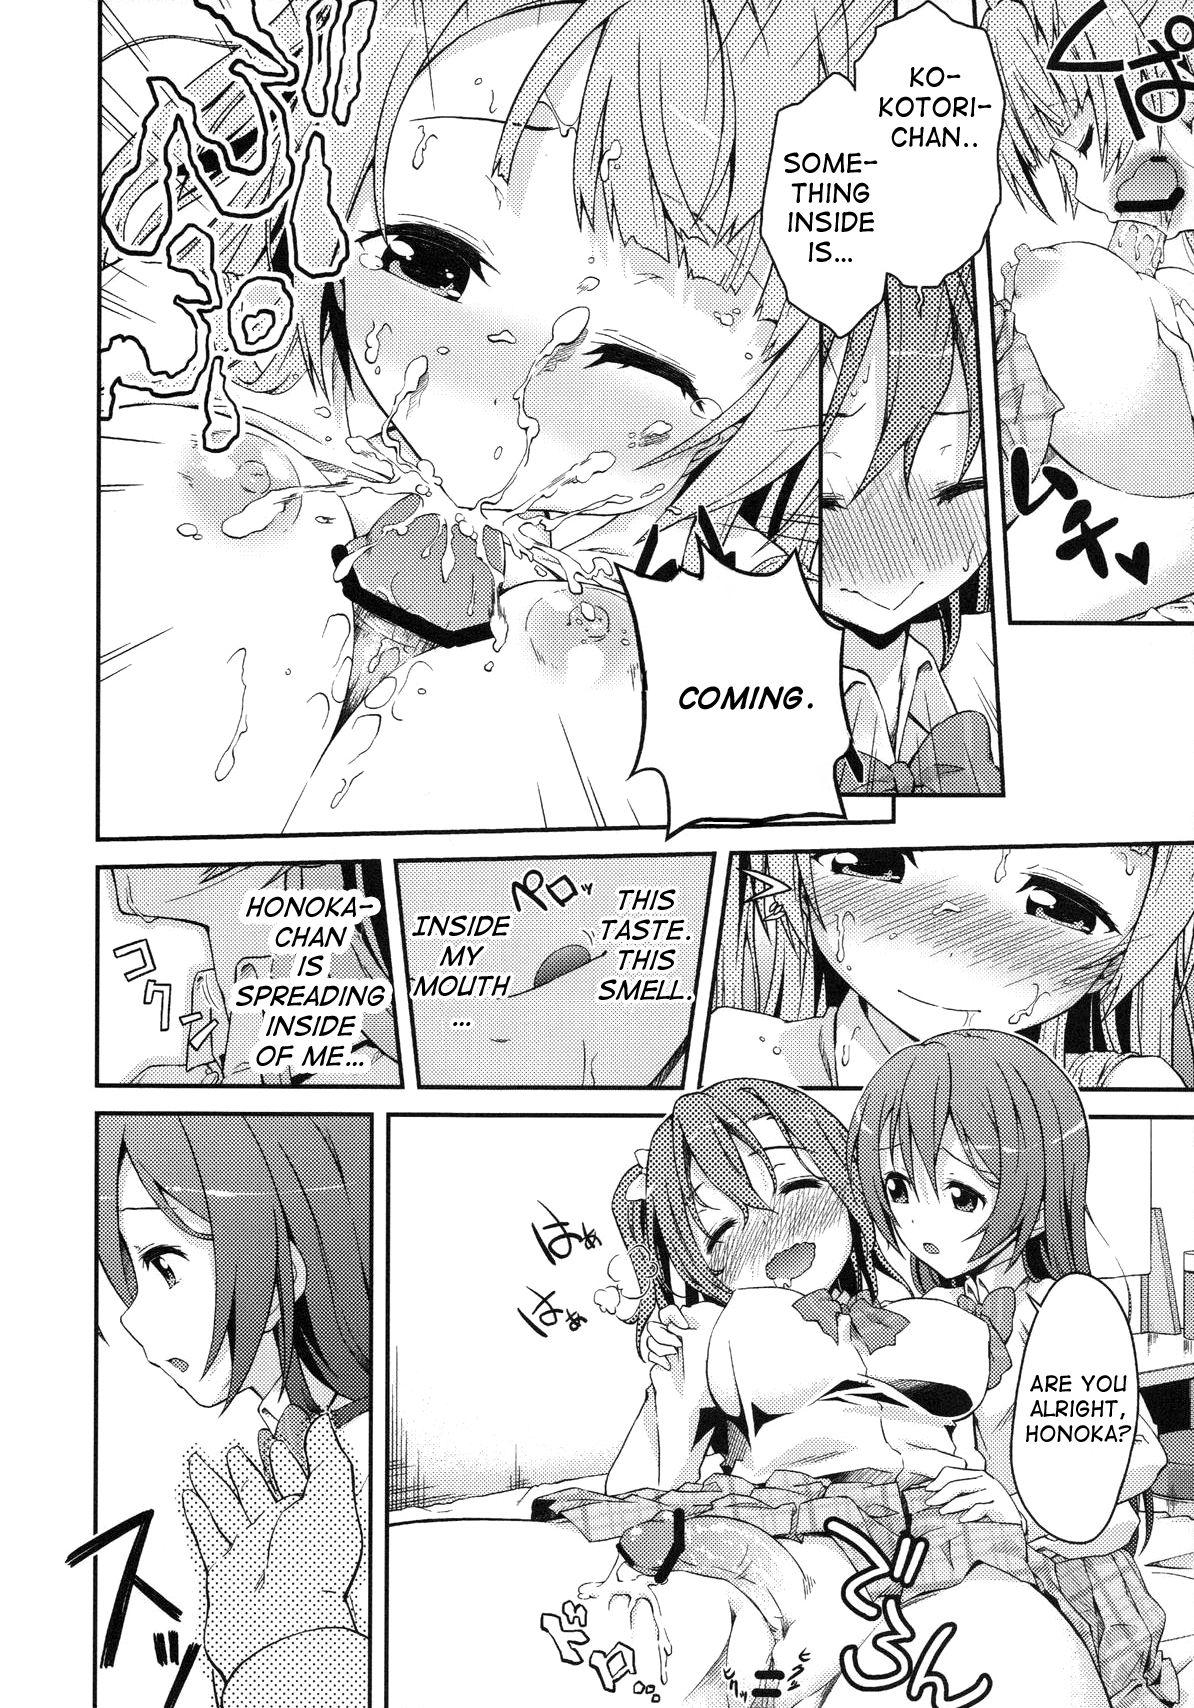 Free Blowjobs Love Linve! - Love live Jerk - Page 9